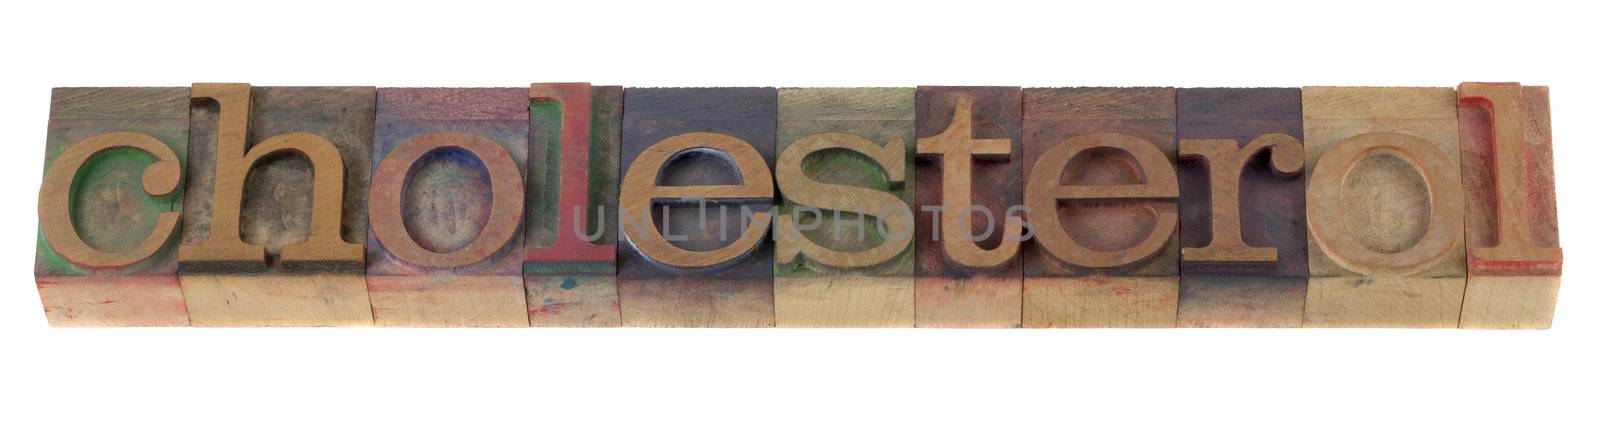 cholesterol - word in vintage letterpress printing blocks, stained by color inks, isolated on white